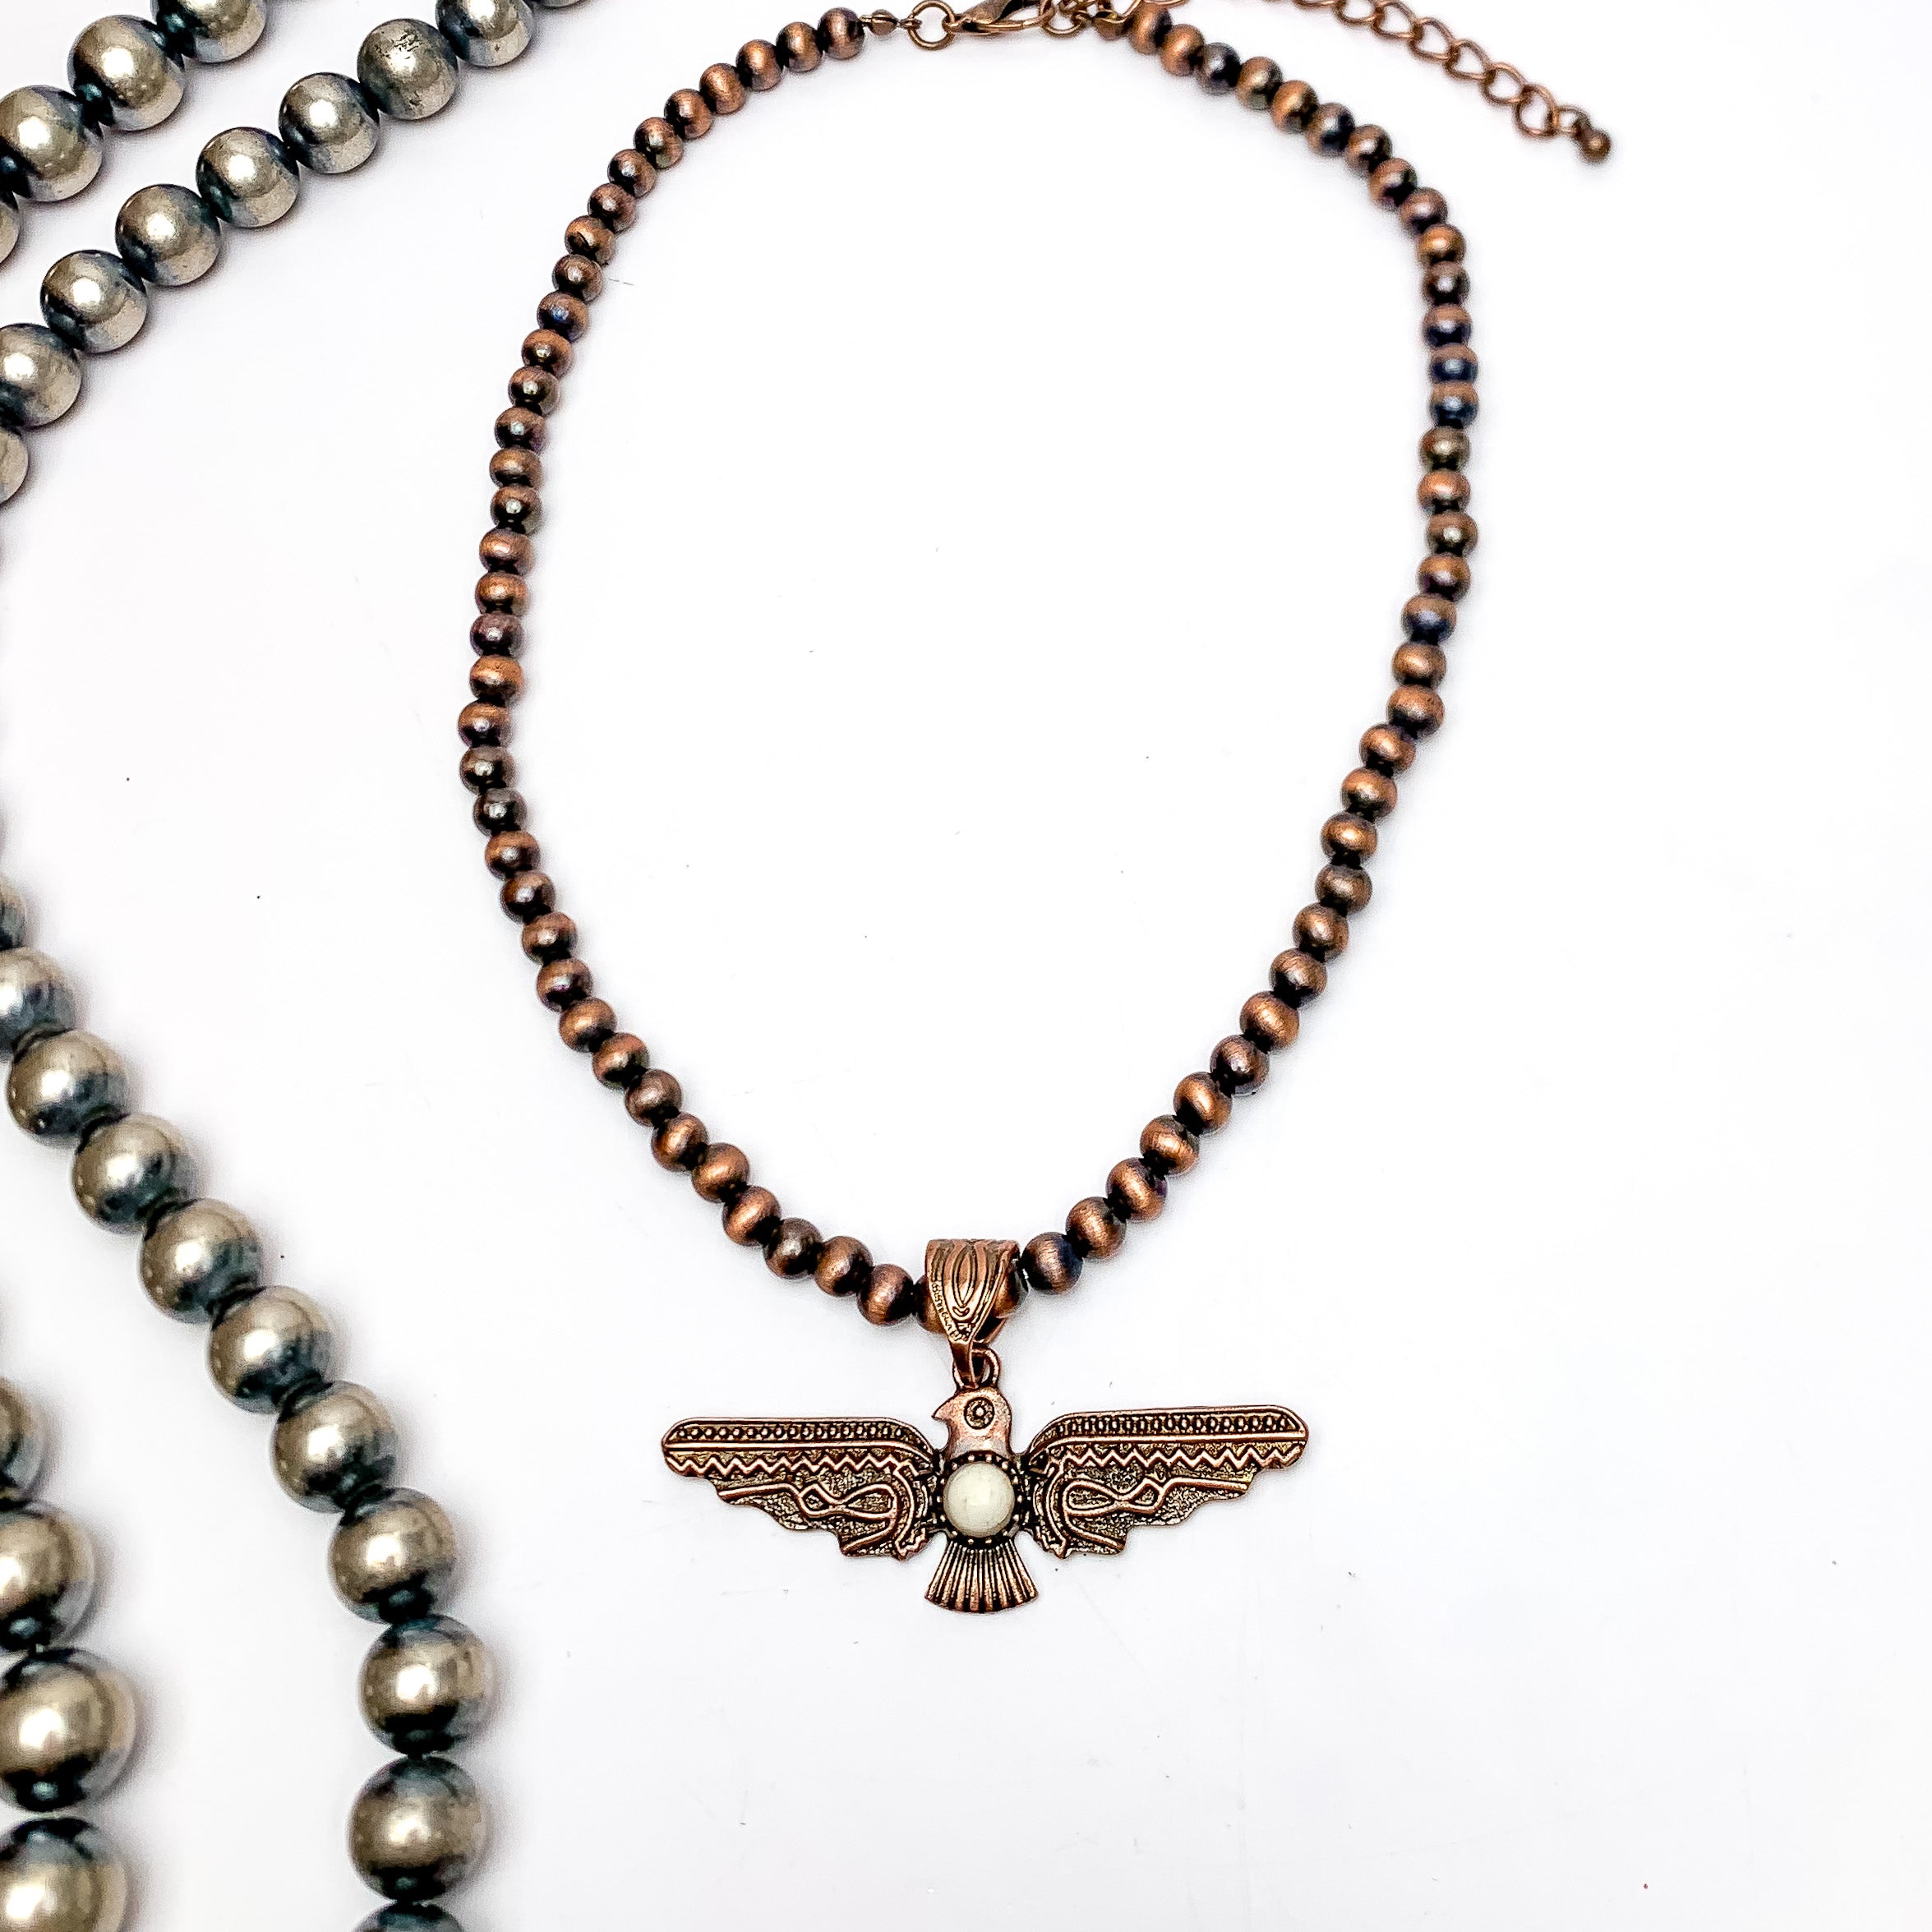 Thunder Bird Pendent Copper Tone Beaded Necklace. This silver beaded necklace with a turquoise stone is pictured on a white background with Navajo beads on the left side.